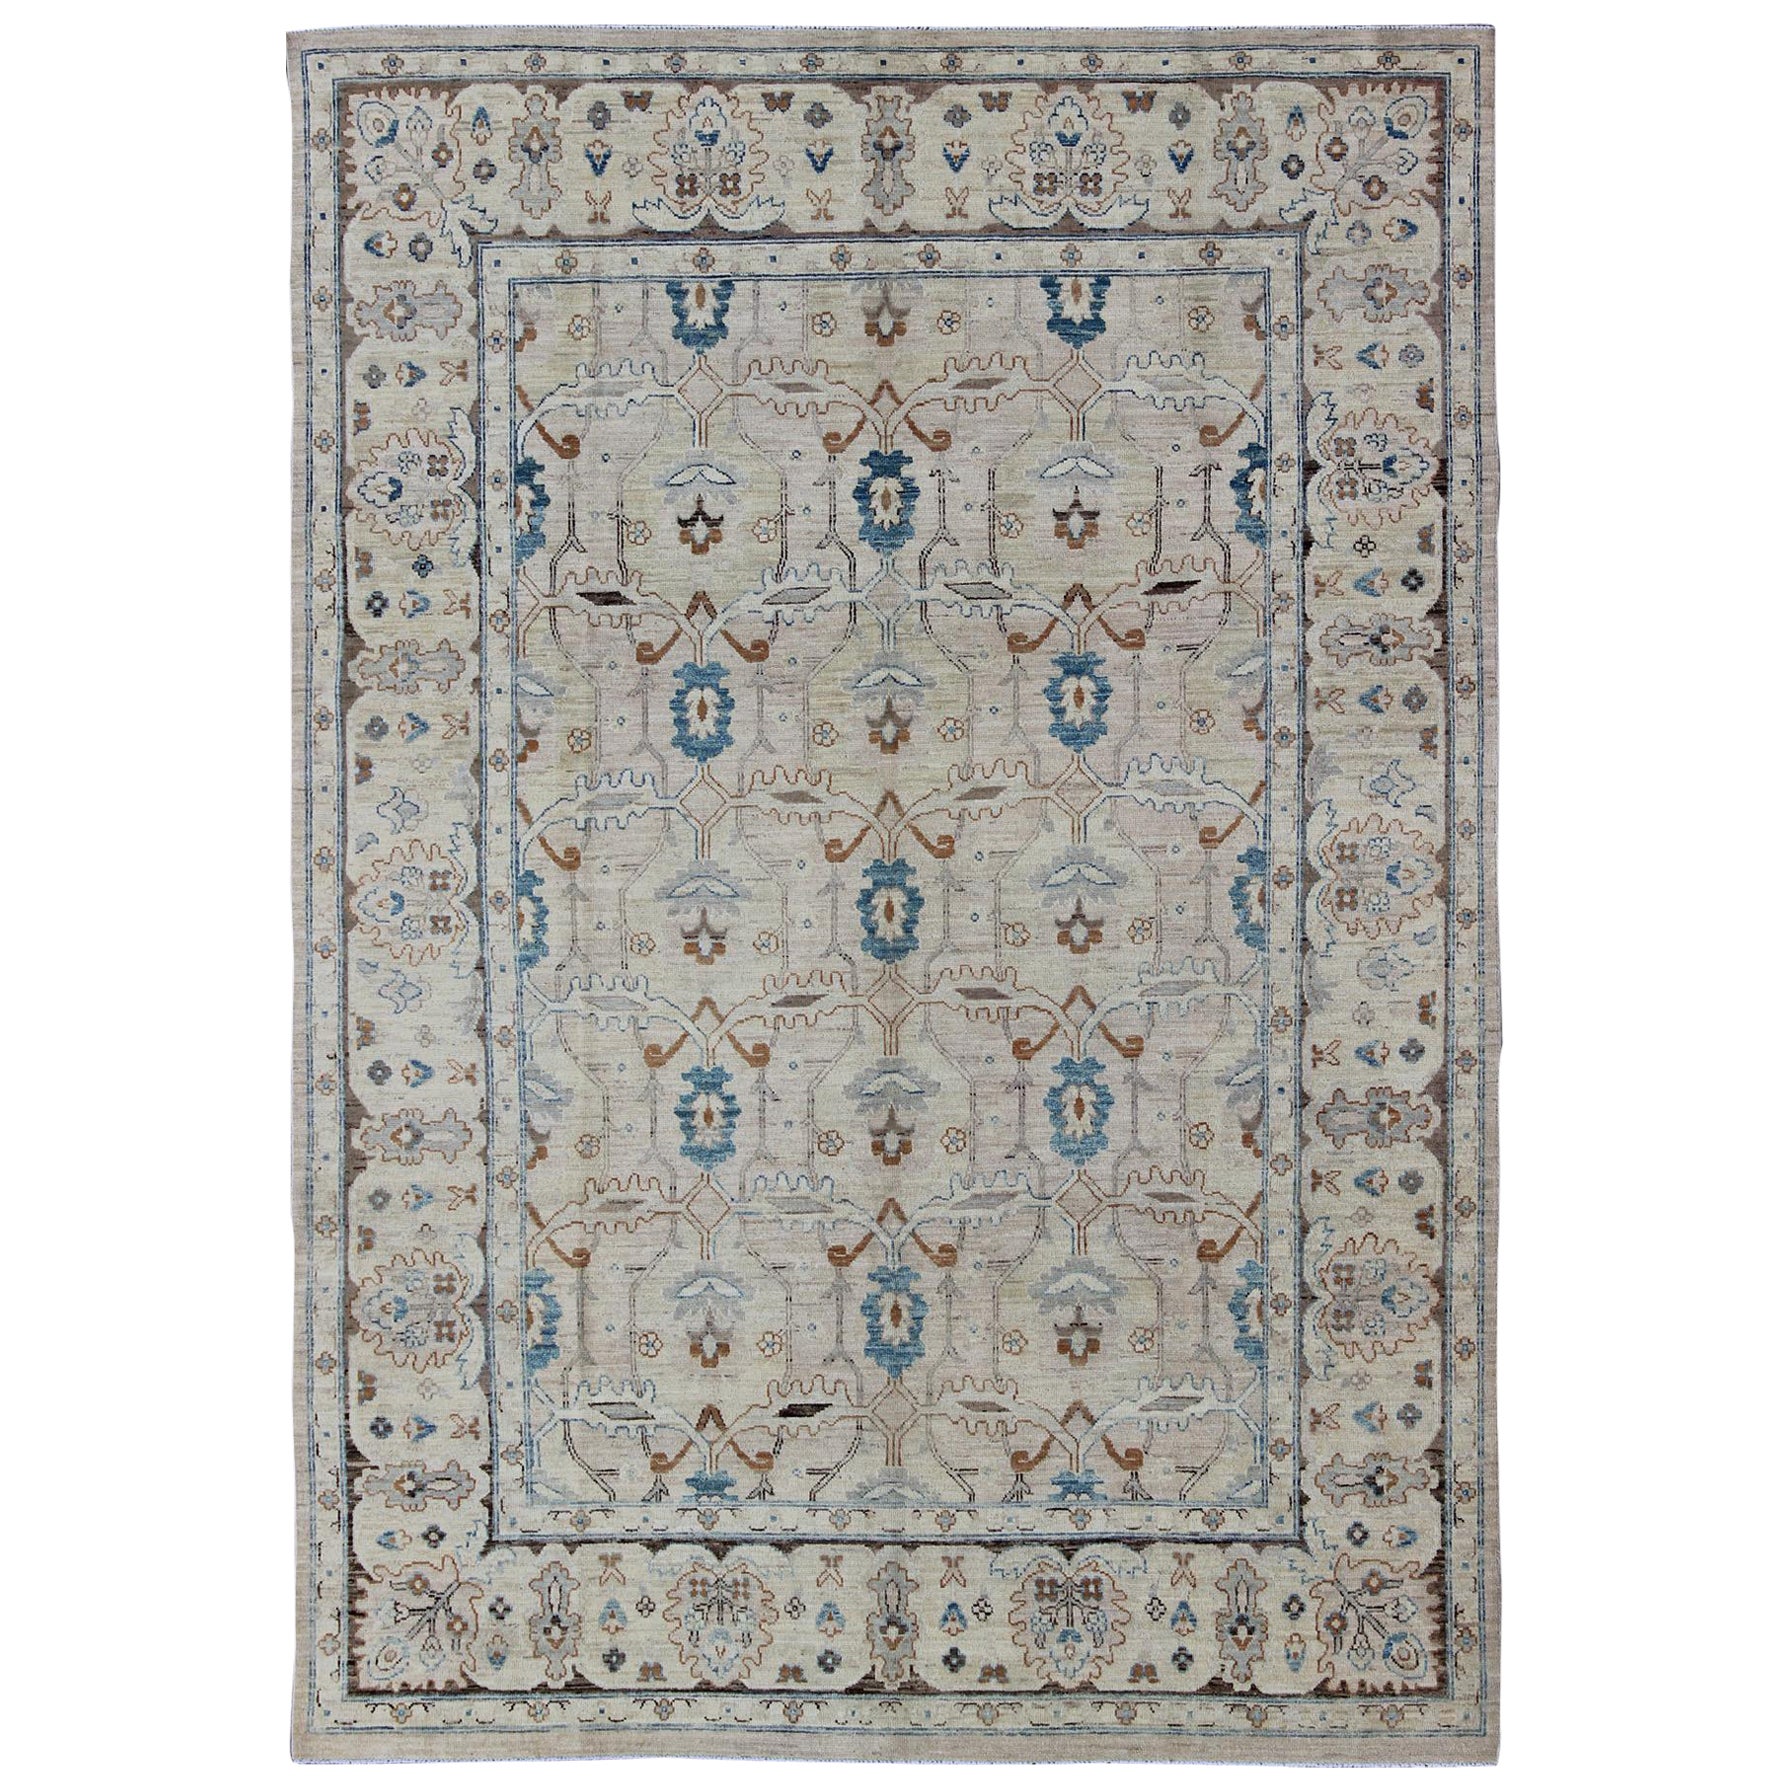 Khotan Design Rug with All-Over Geometric Pattern in Blush, Brown, Tan, and Blue For Sale